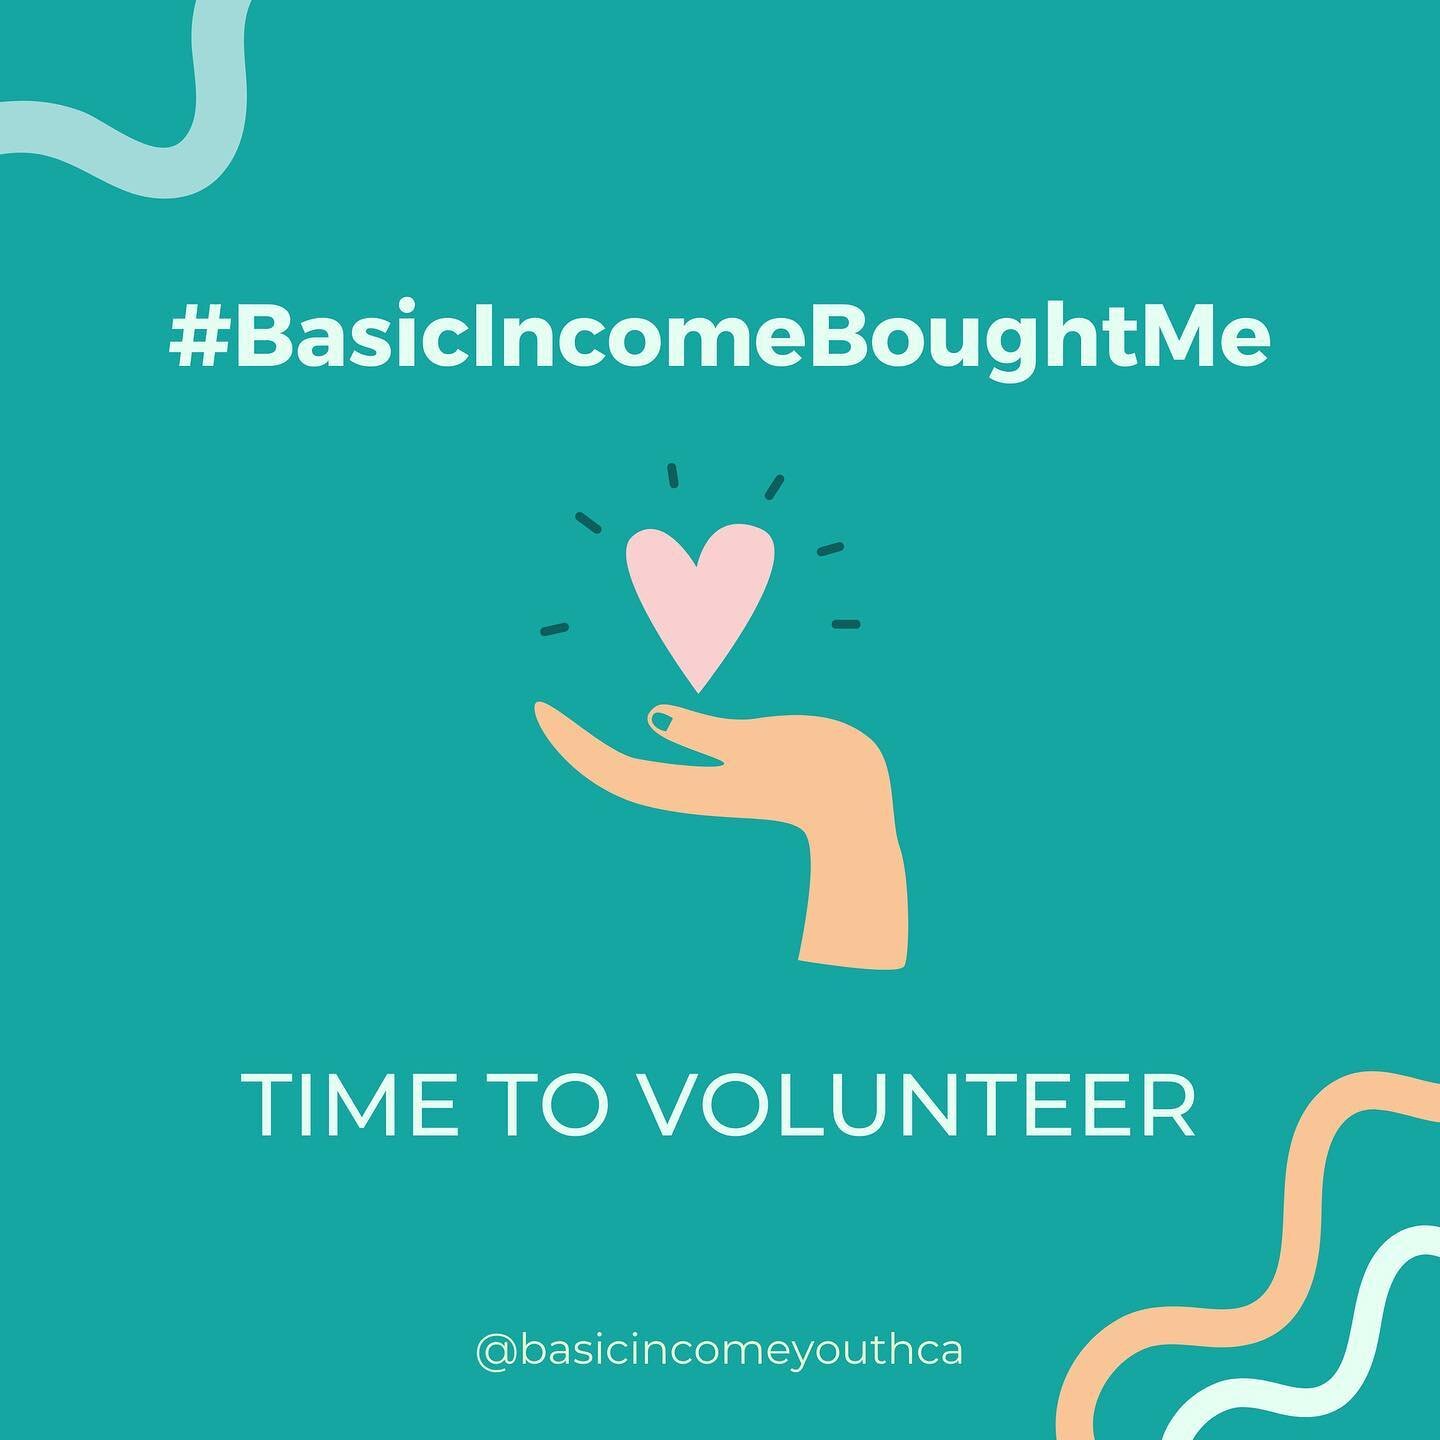 Sometimes, the things purchased with a little extra income aren't quite as tangible as new clothing or fresh food - but that doesn't make them any less important. This week, we're sharing how participants spent basic income payments on personal and p